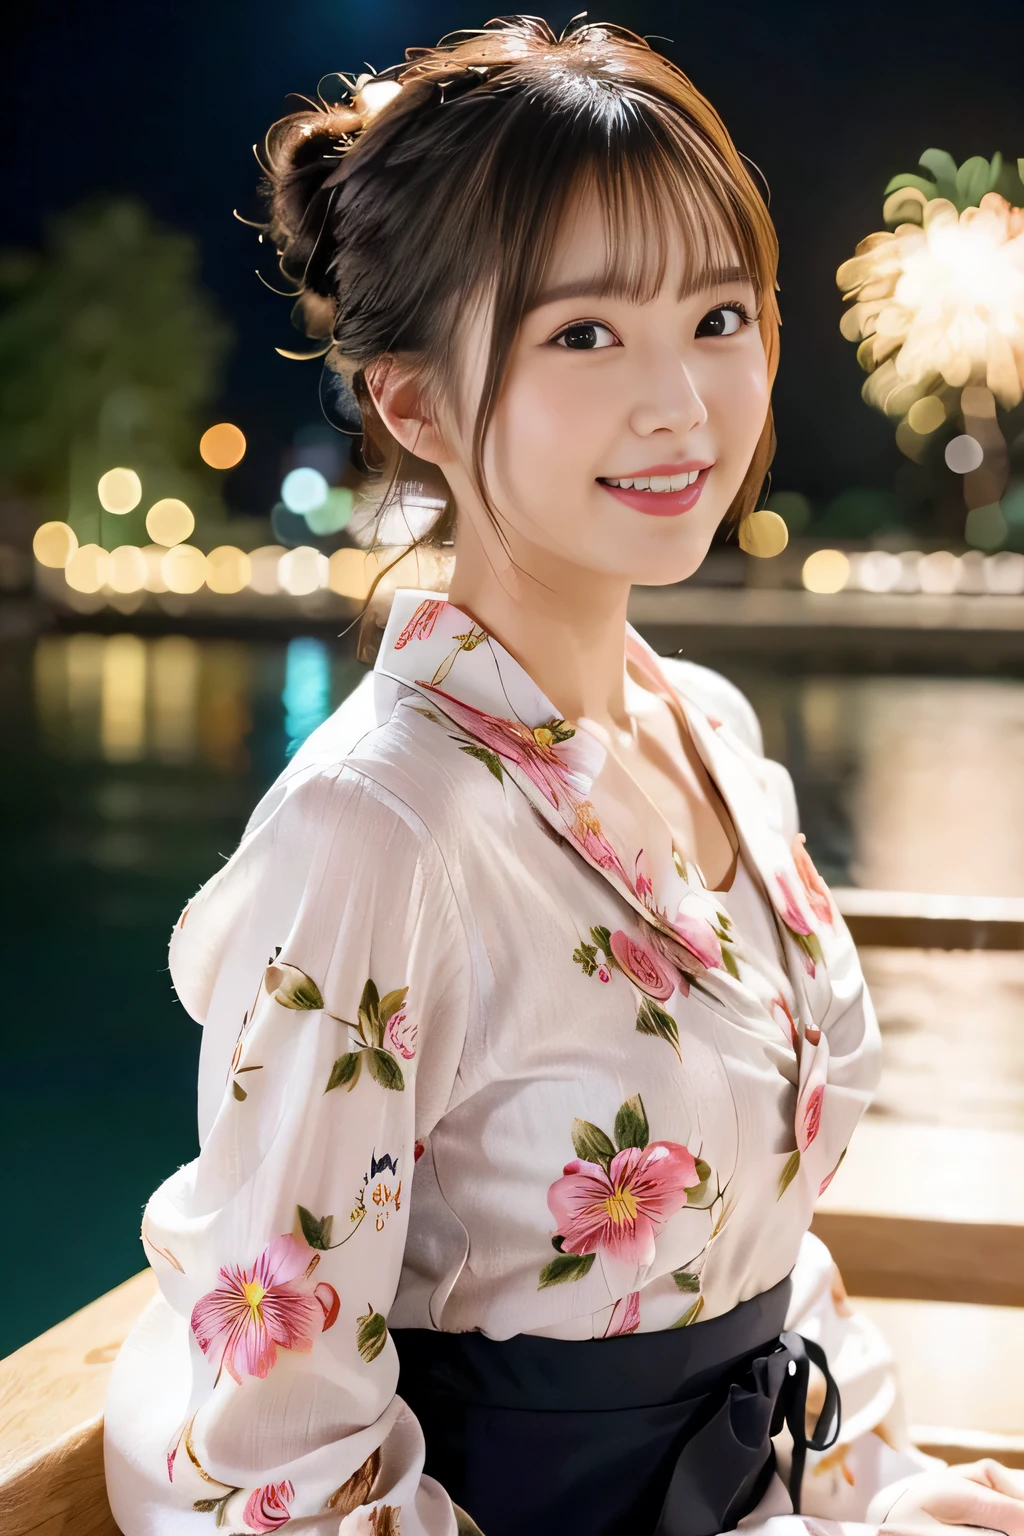 (beautiful mature adult woman),(flower hair ornament,floral braided top knot,twisted side part ponytail,floral braided headband,half up、floral braided space buns,voluminous fishtail braid,Twisted pan,),(The bangs are see-through bangs),very delicate and beautiful hair,(((emphasize the chest:1.3))),(dynamic angle),(dynamic and sexy pose),laughter、Looking back wearing a floral yukata isolated on white background、Fireworks being launched into the sky against the backdrop of the riverbank at night.、cute round face,big breasts,(table top,highest quality,Ultra high resolution output image,) ,(8K quality,),(sea art 2 mode.1),(Image mode Ultra HD,)